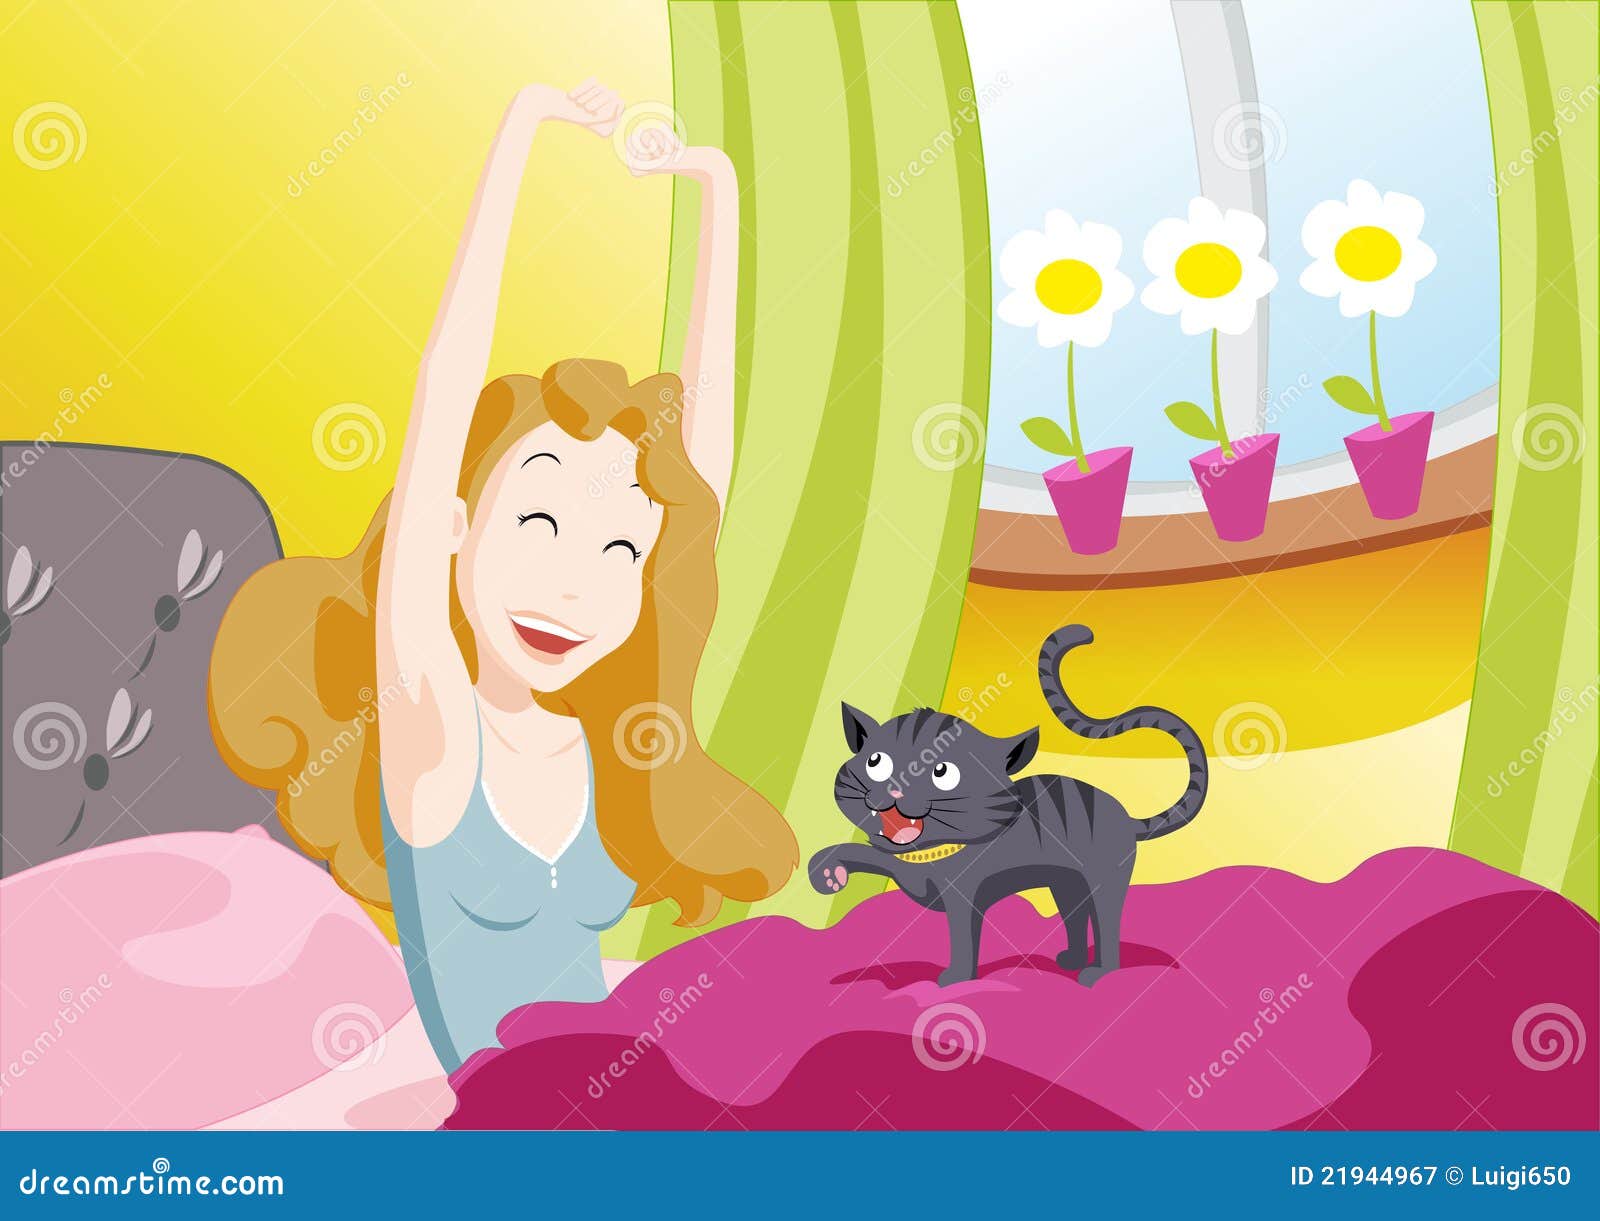 clipart of girl waking up - photo #36